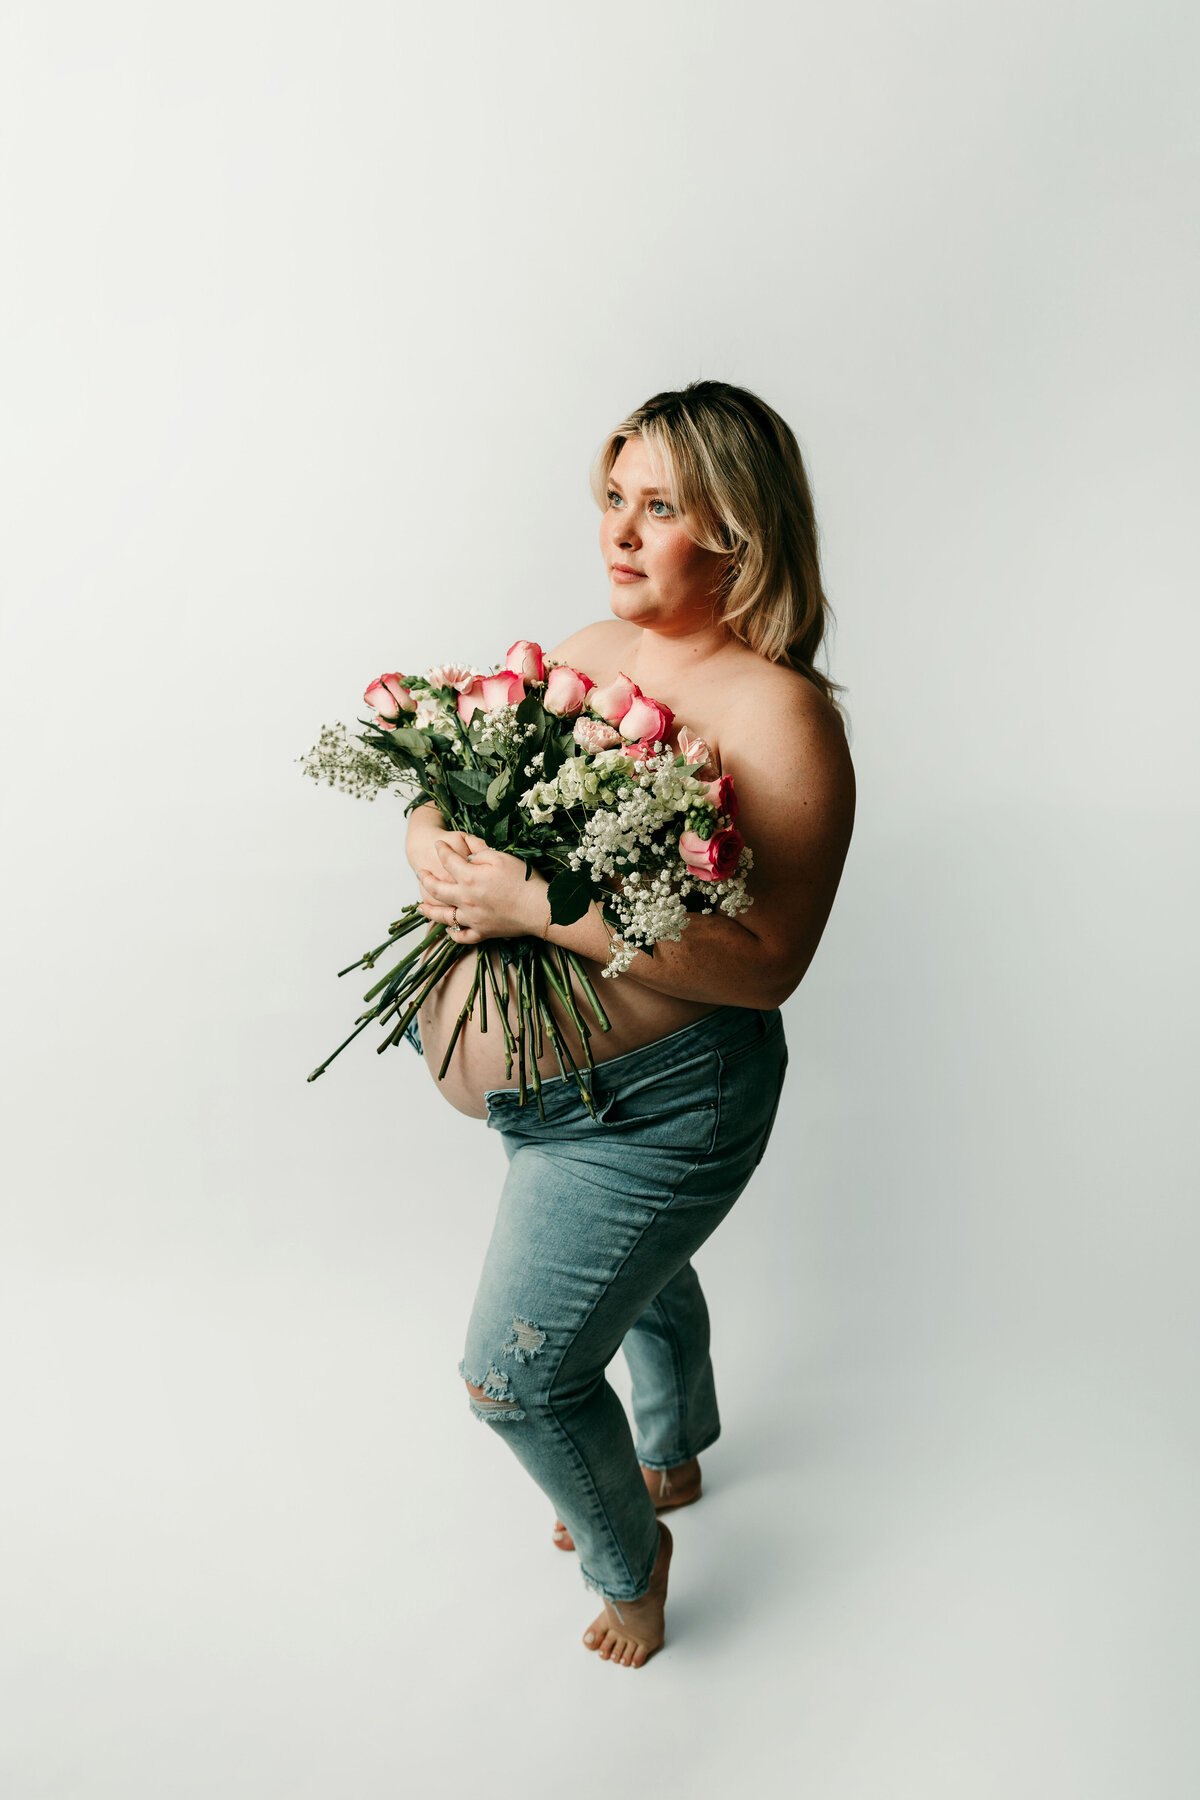 A mom shows off her pregnant belly while holding a bouquet of flowers to her chest.